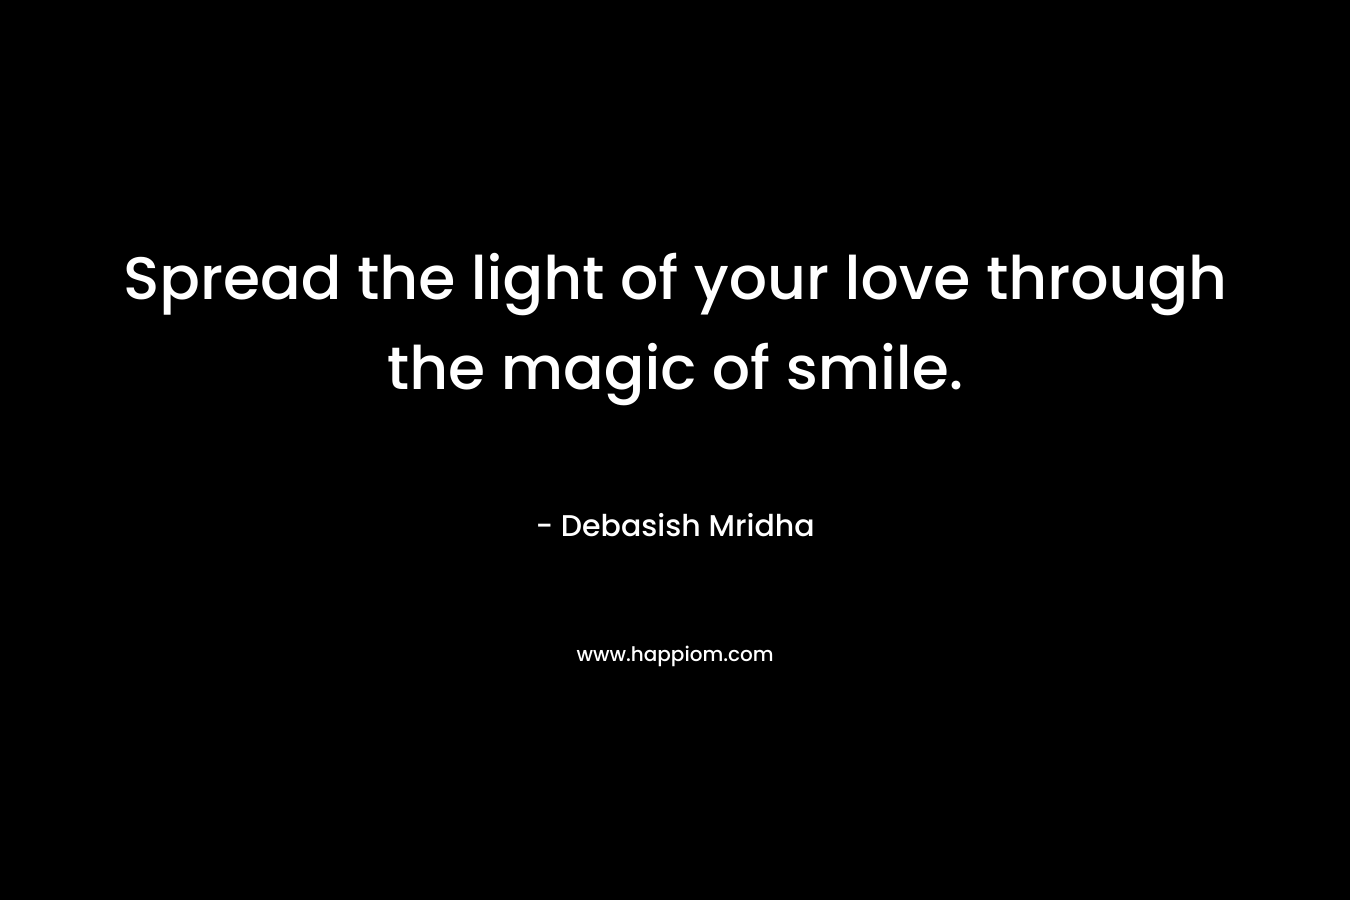 Spread the light of your love through the magic of smile.